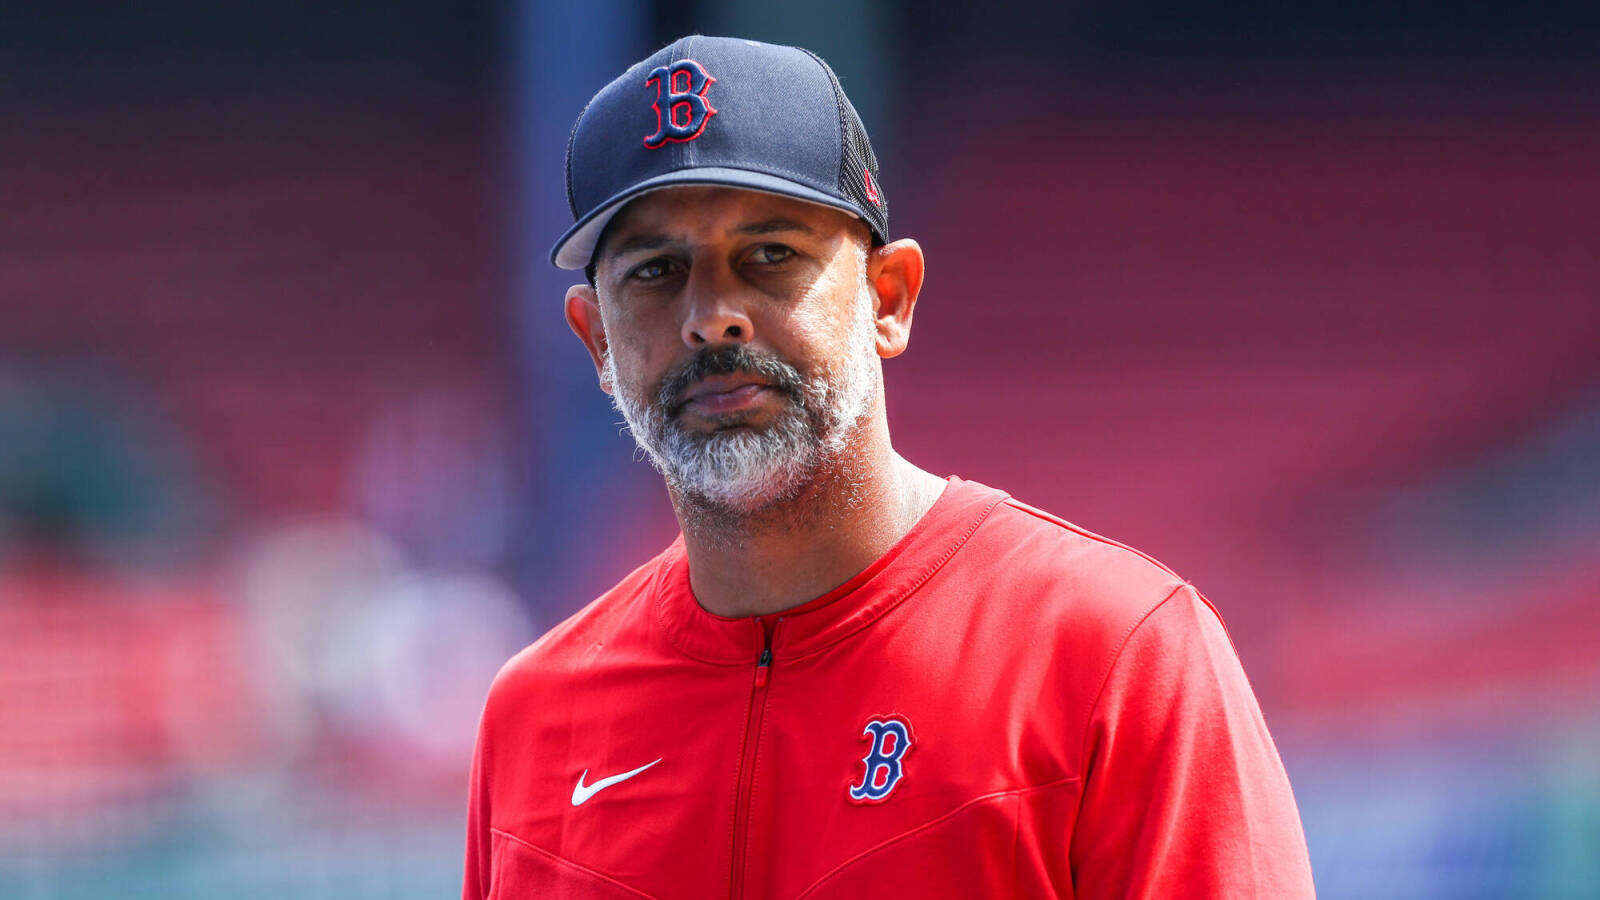 Red Sox manager Alex Cora returns to team